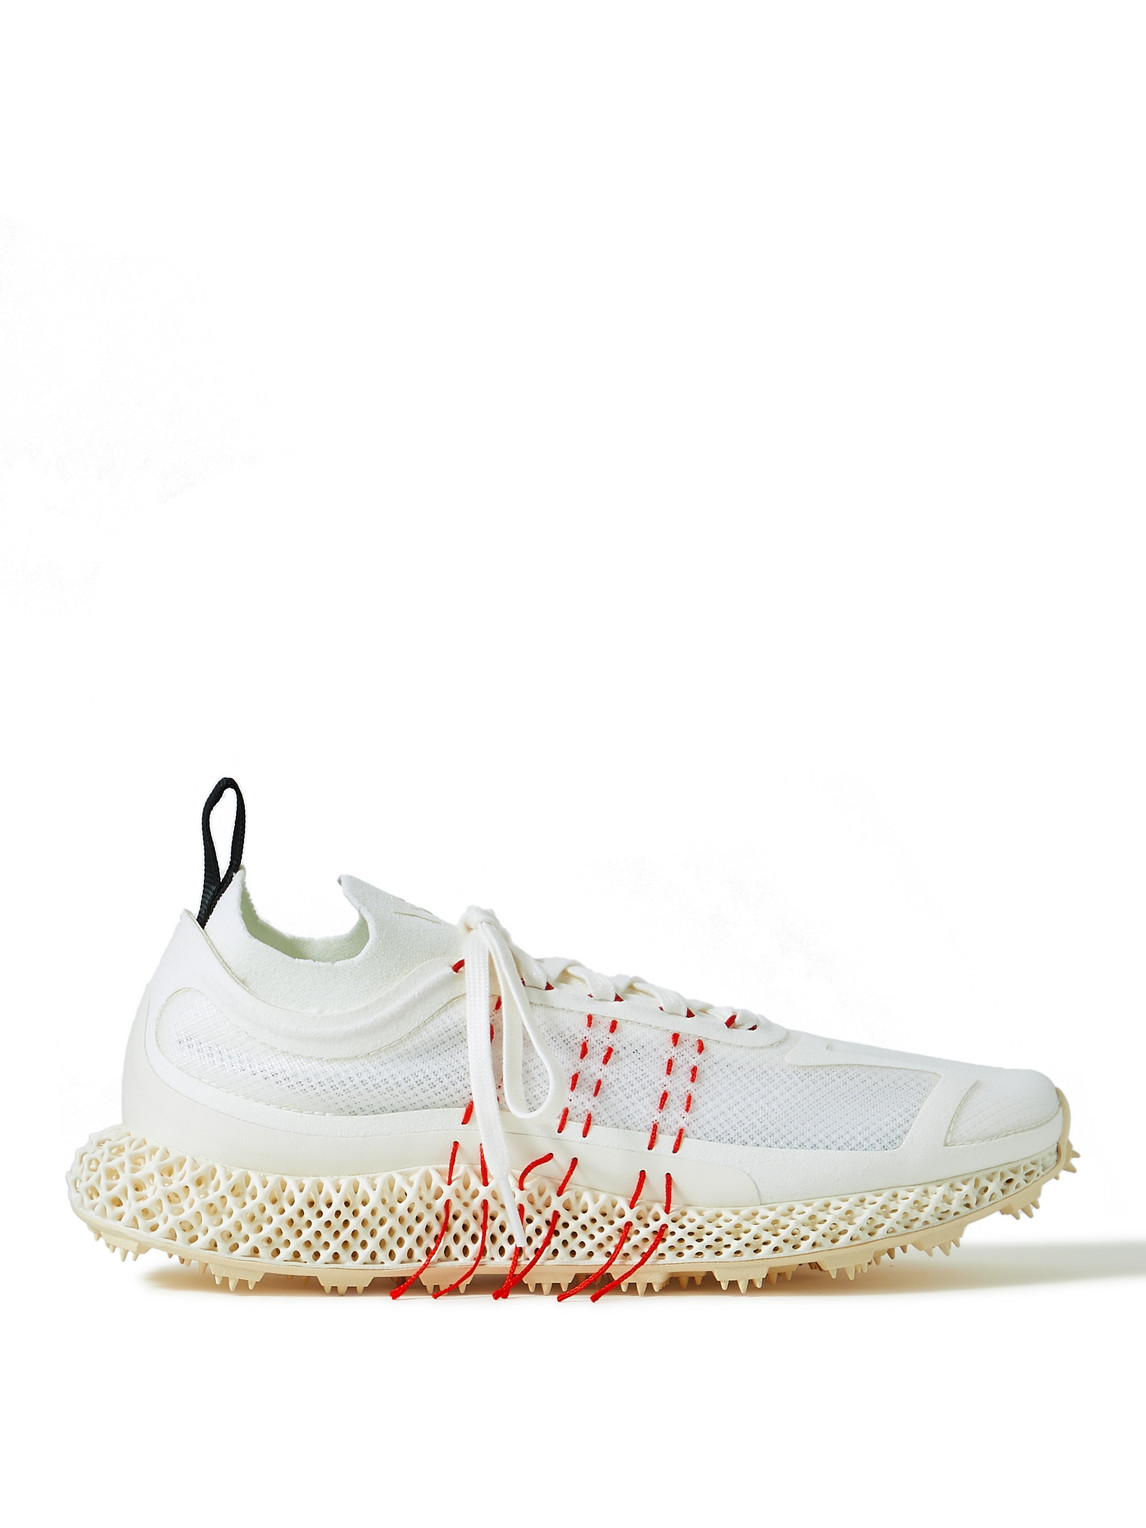 Runner 4D Halo Embroidered Mesh and Primeknit Sneakers